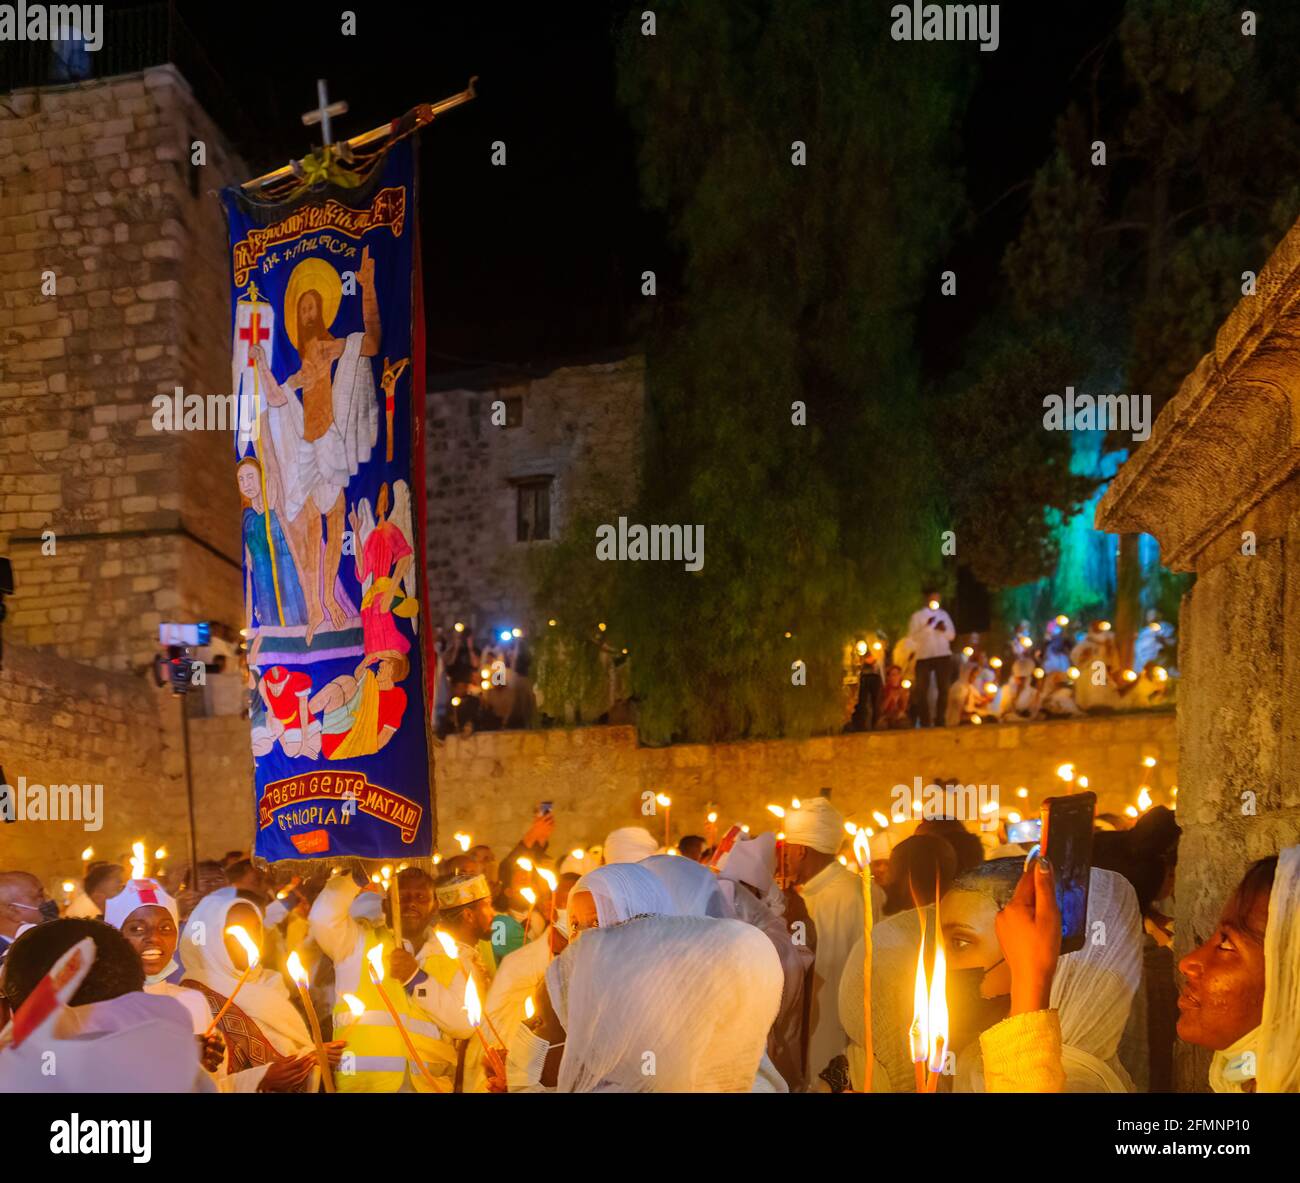 Jerusalem, Israel - May 01, 2021: Paschal Vigil (Easter Holy Saturday) fire celebration of the Ethiopian Orthodox Tewahedo Church, in the courtyard of Stock Photo